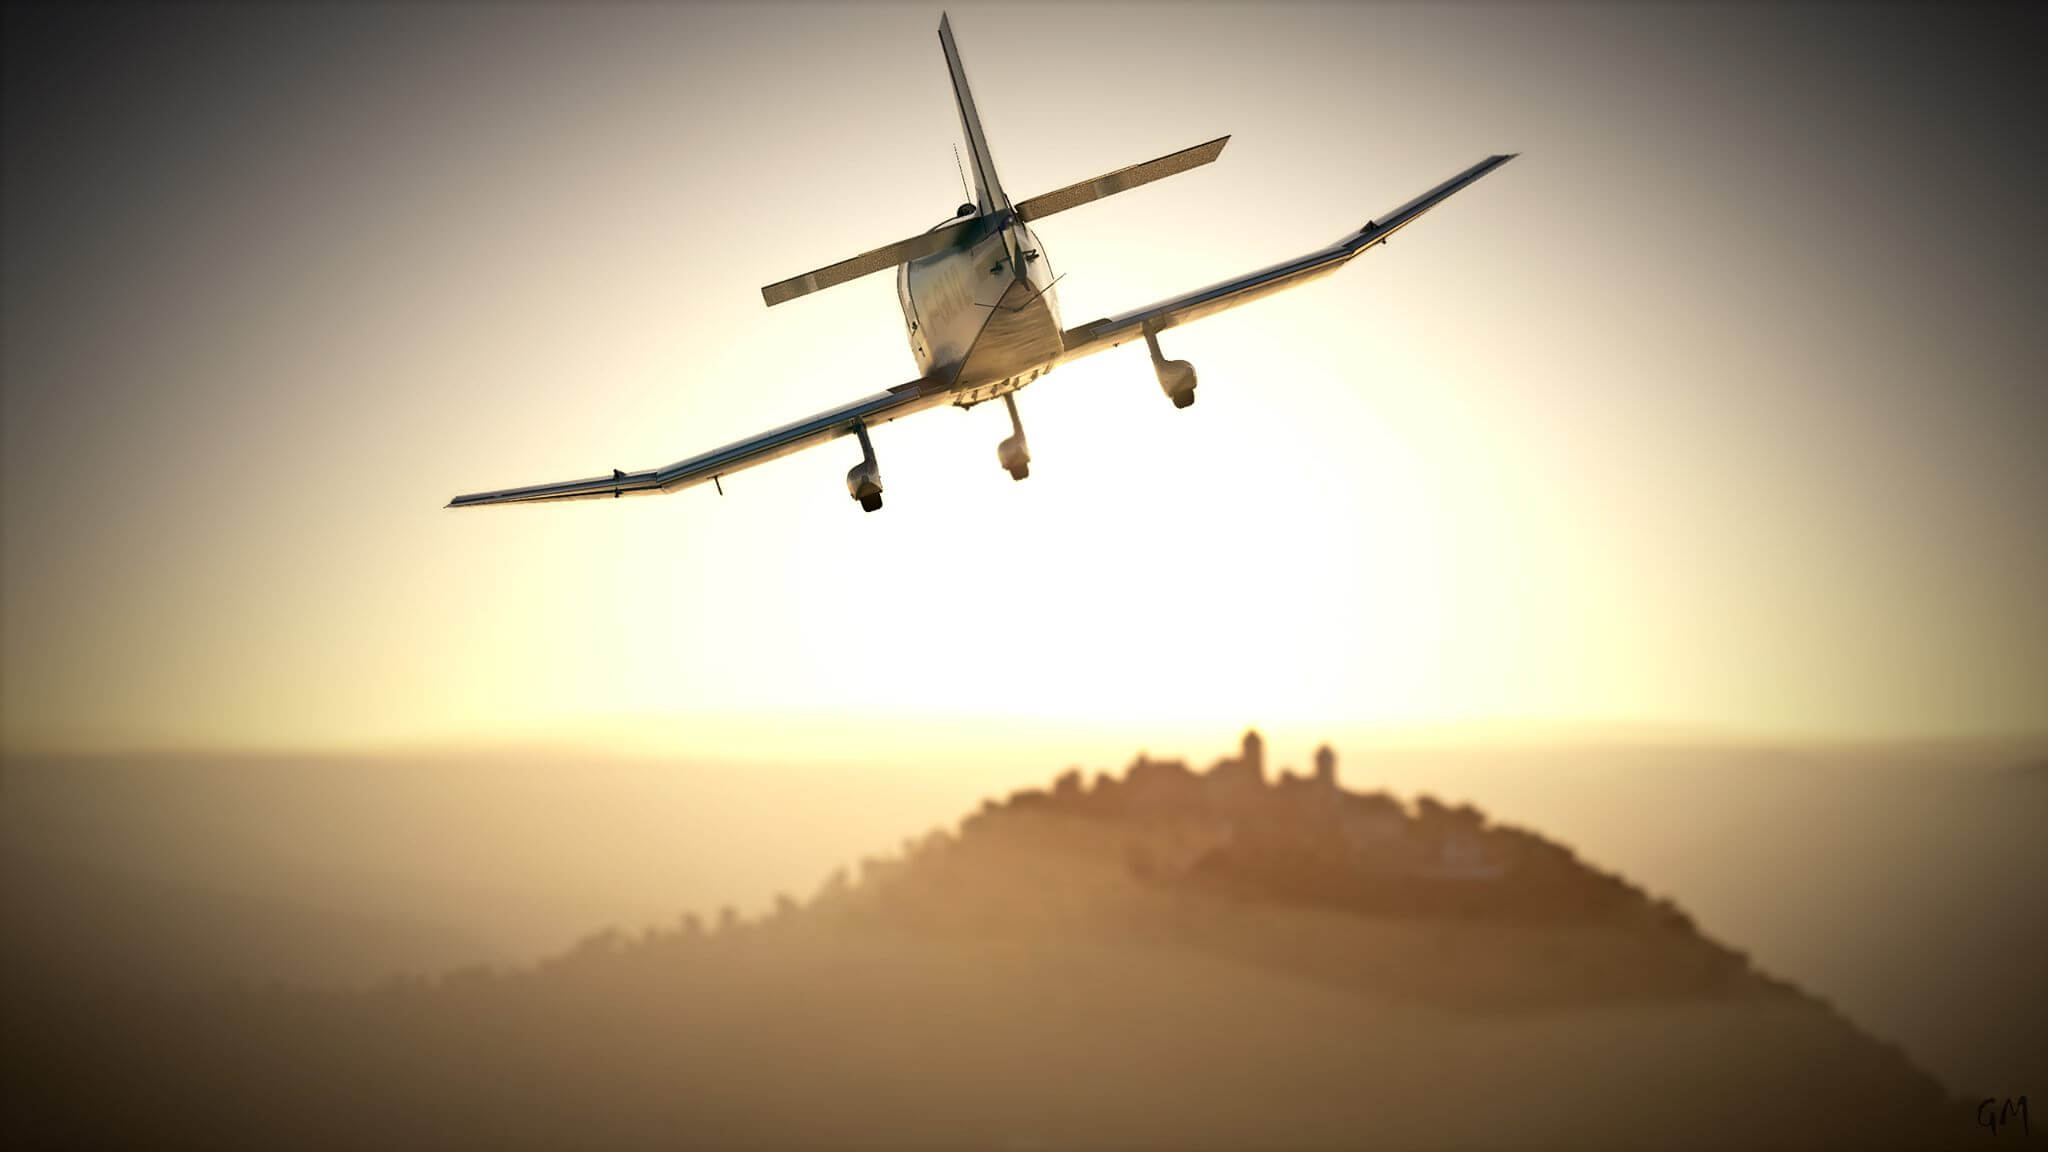 A DR-40 banks to the left flying directly towards the sun, as a hillside is silhouetted ahead.